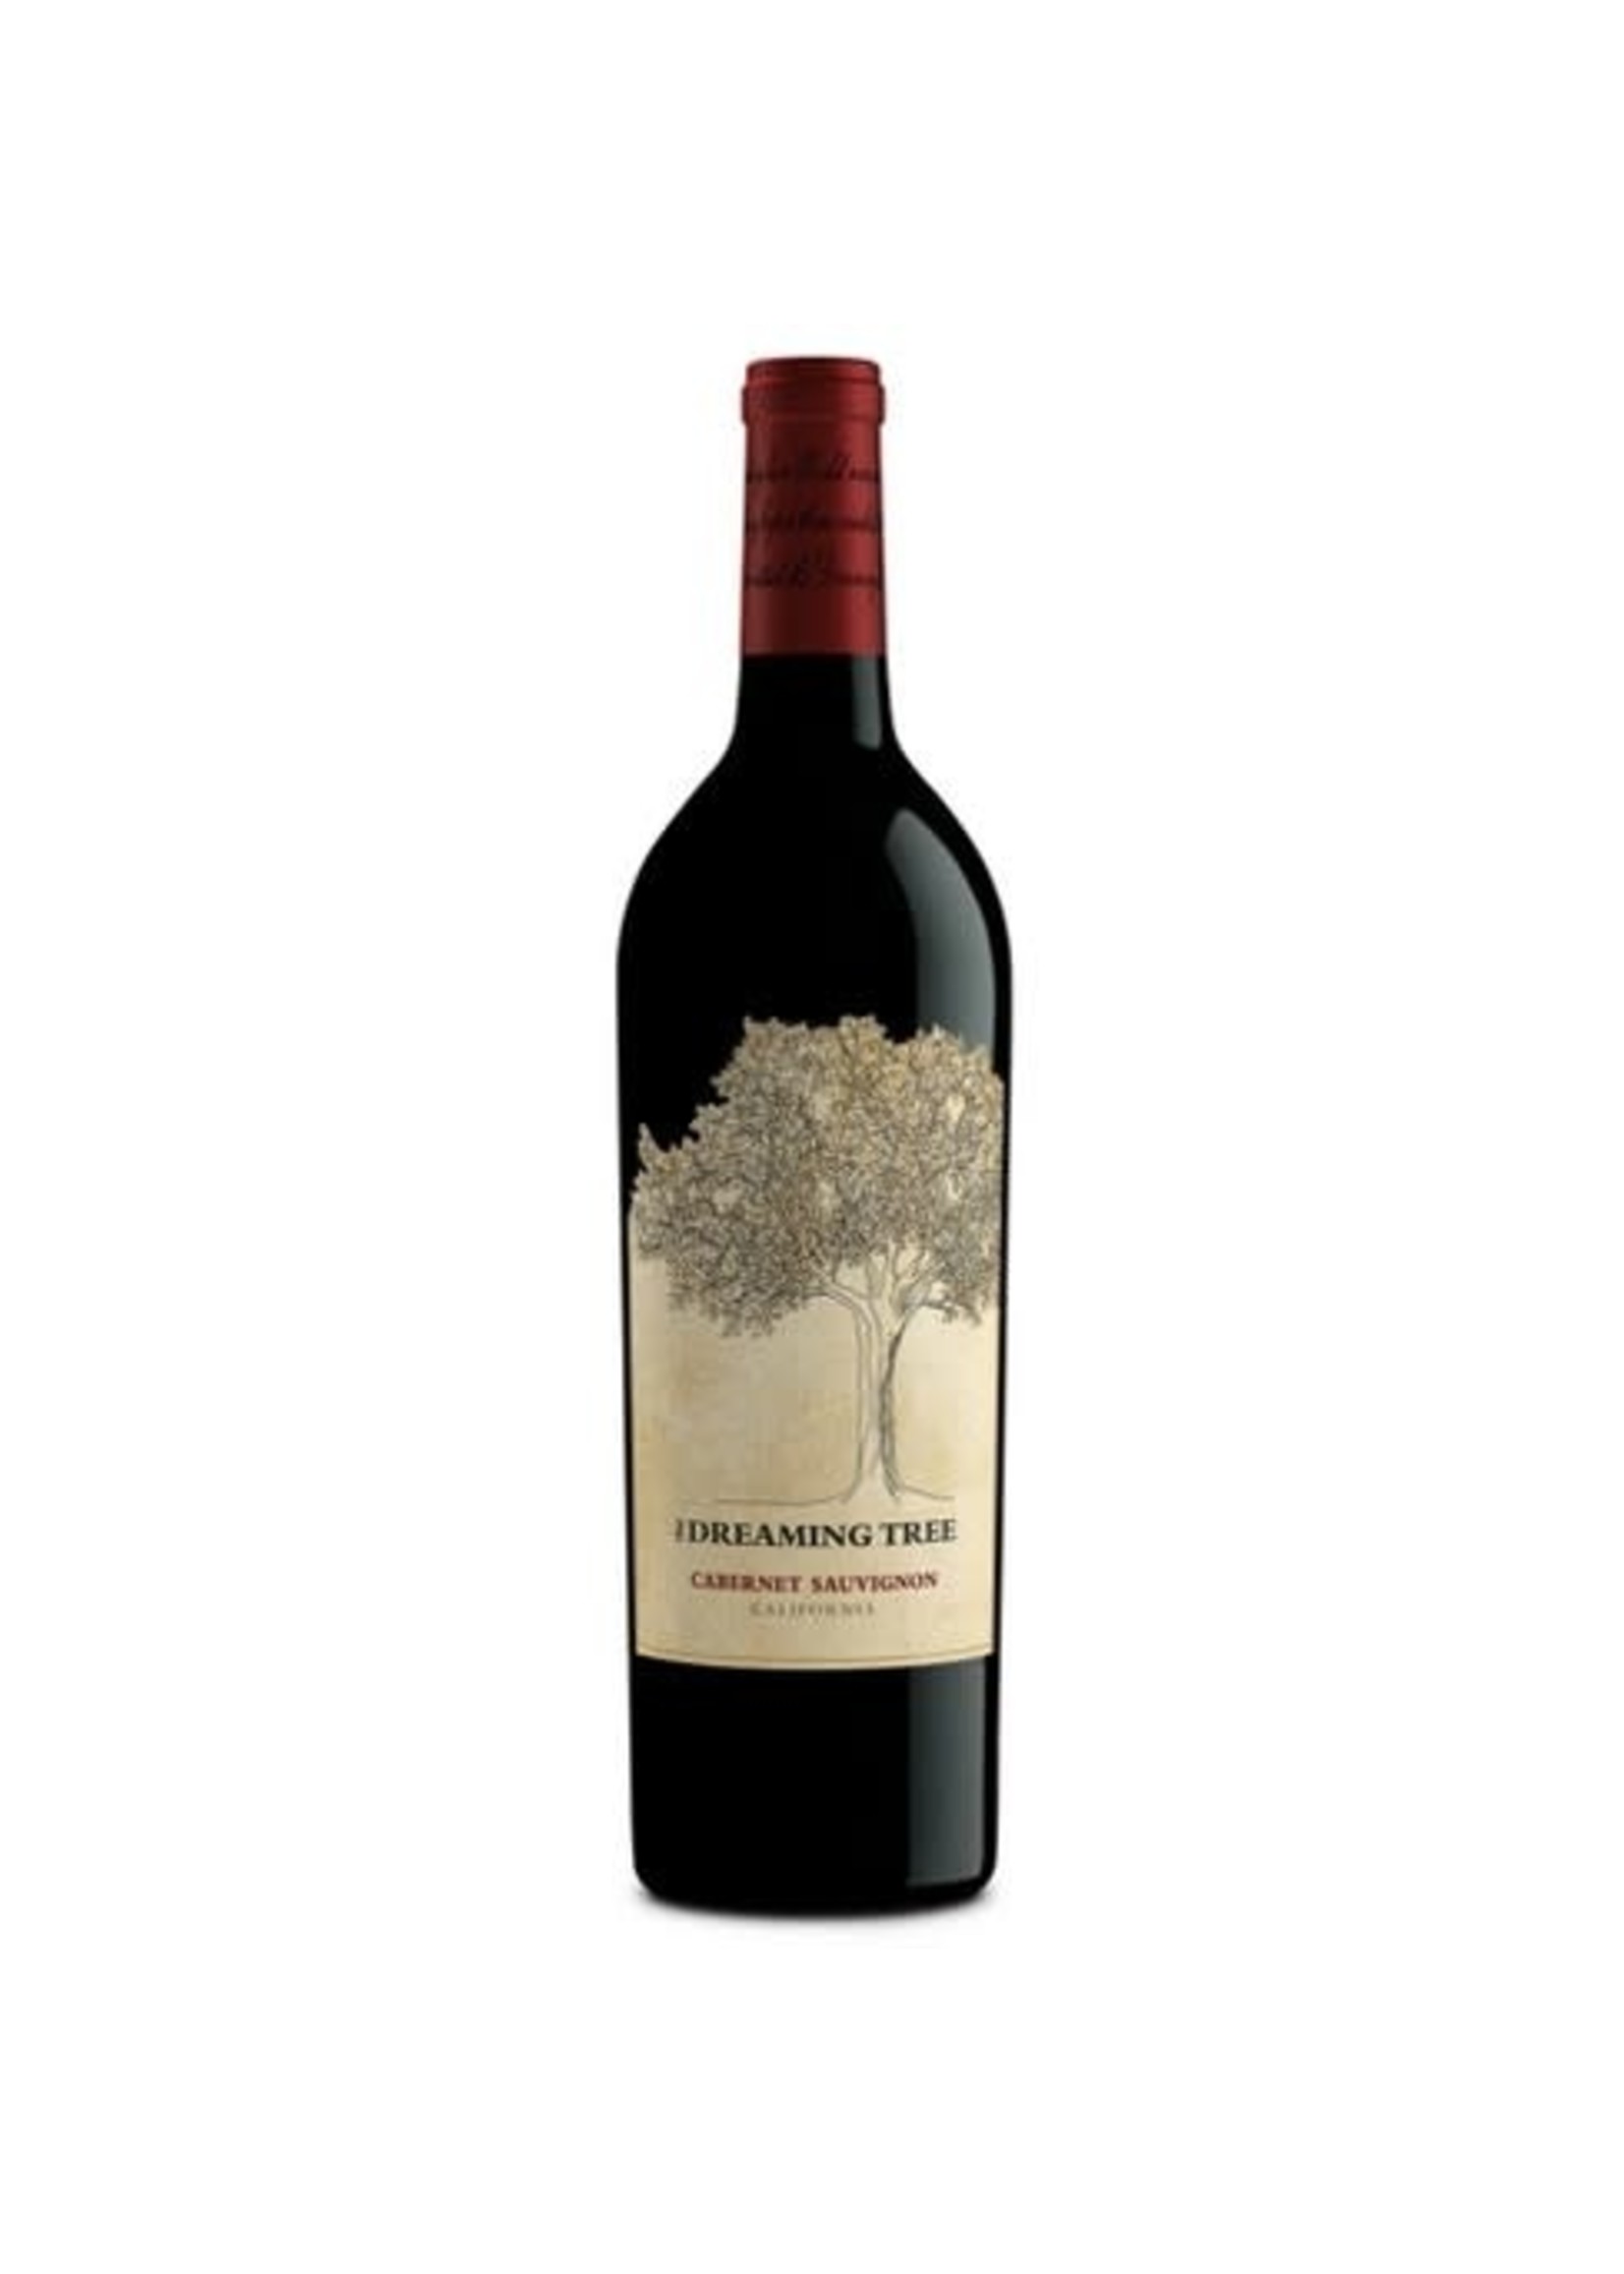 THE DREAMING TREE THE DREAMING TREE	CABERNET SAUVIGNON	.750L